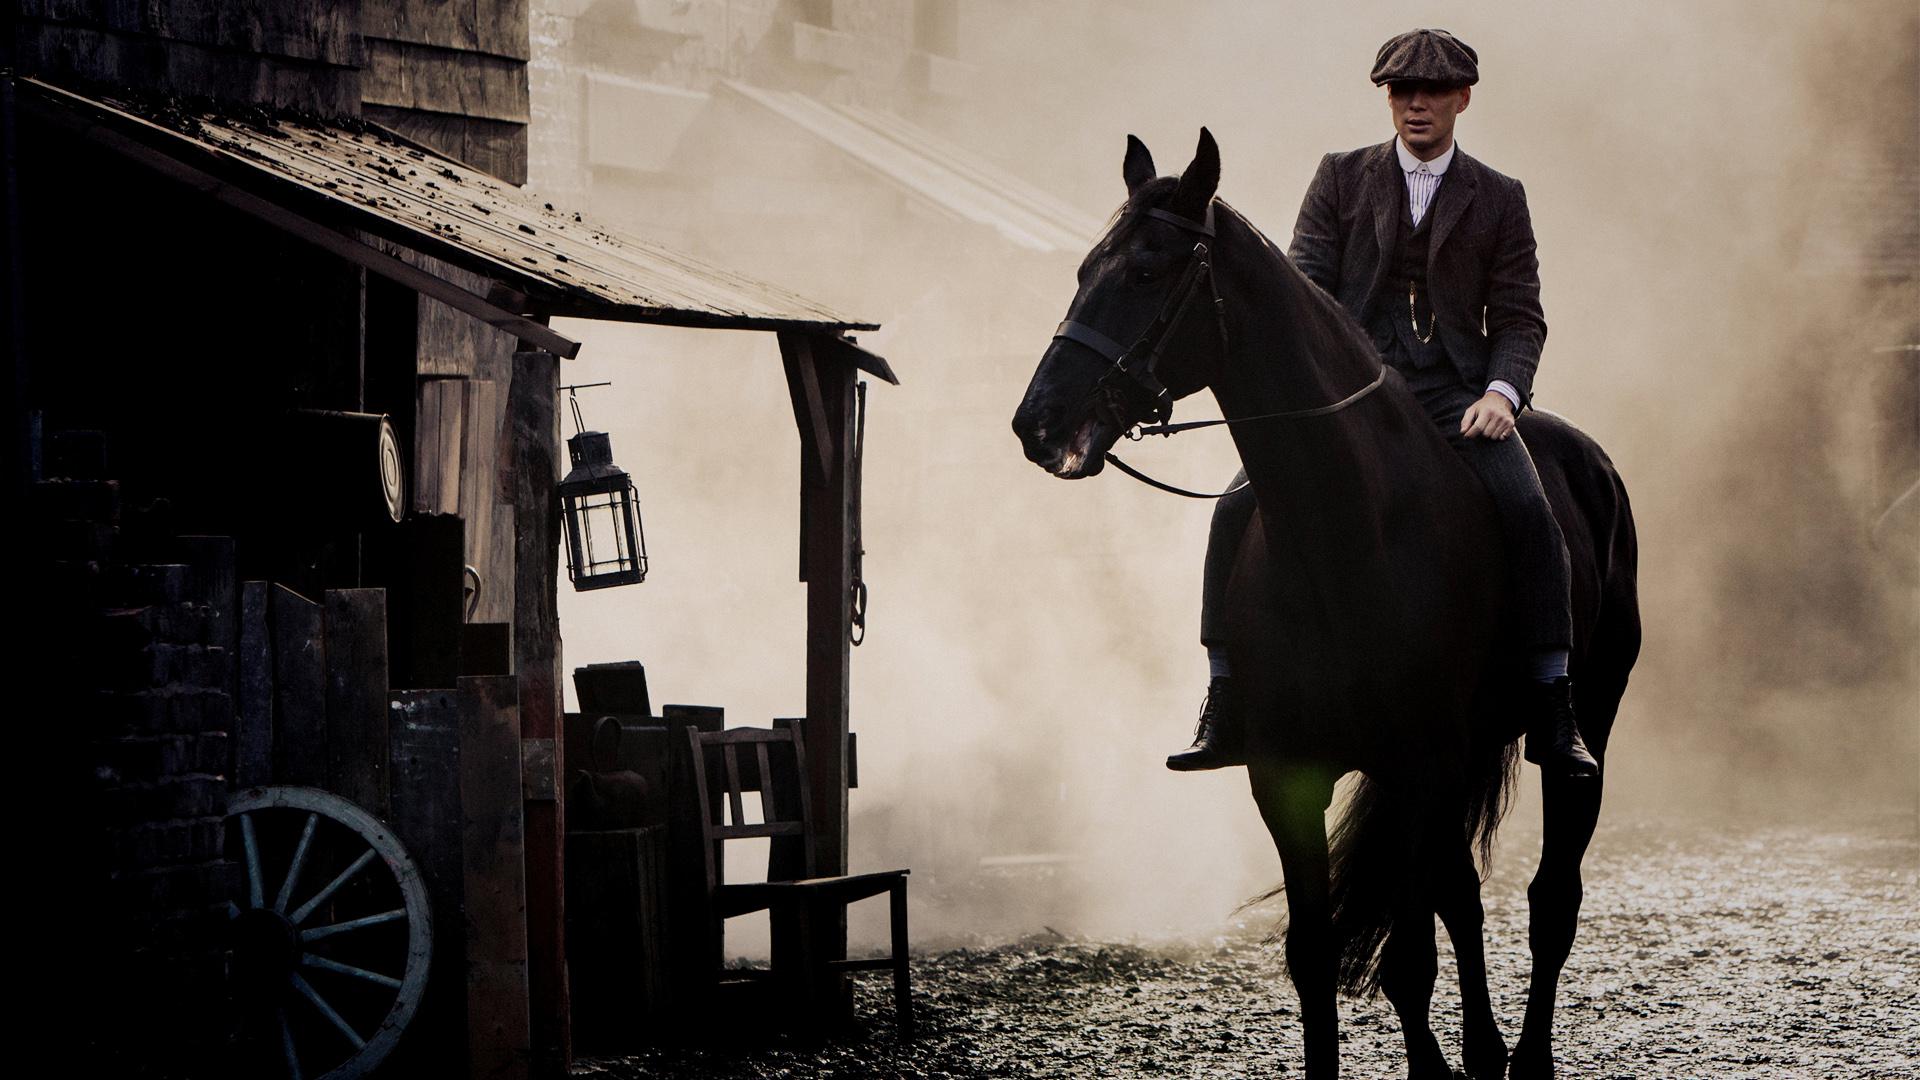 Use this as my desktop background, thought some of you would want to do the same :) The pic is 1920x1080 btw.: PeakyBlinders